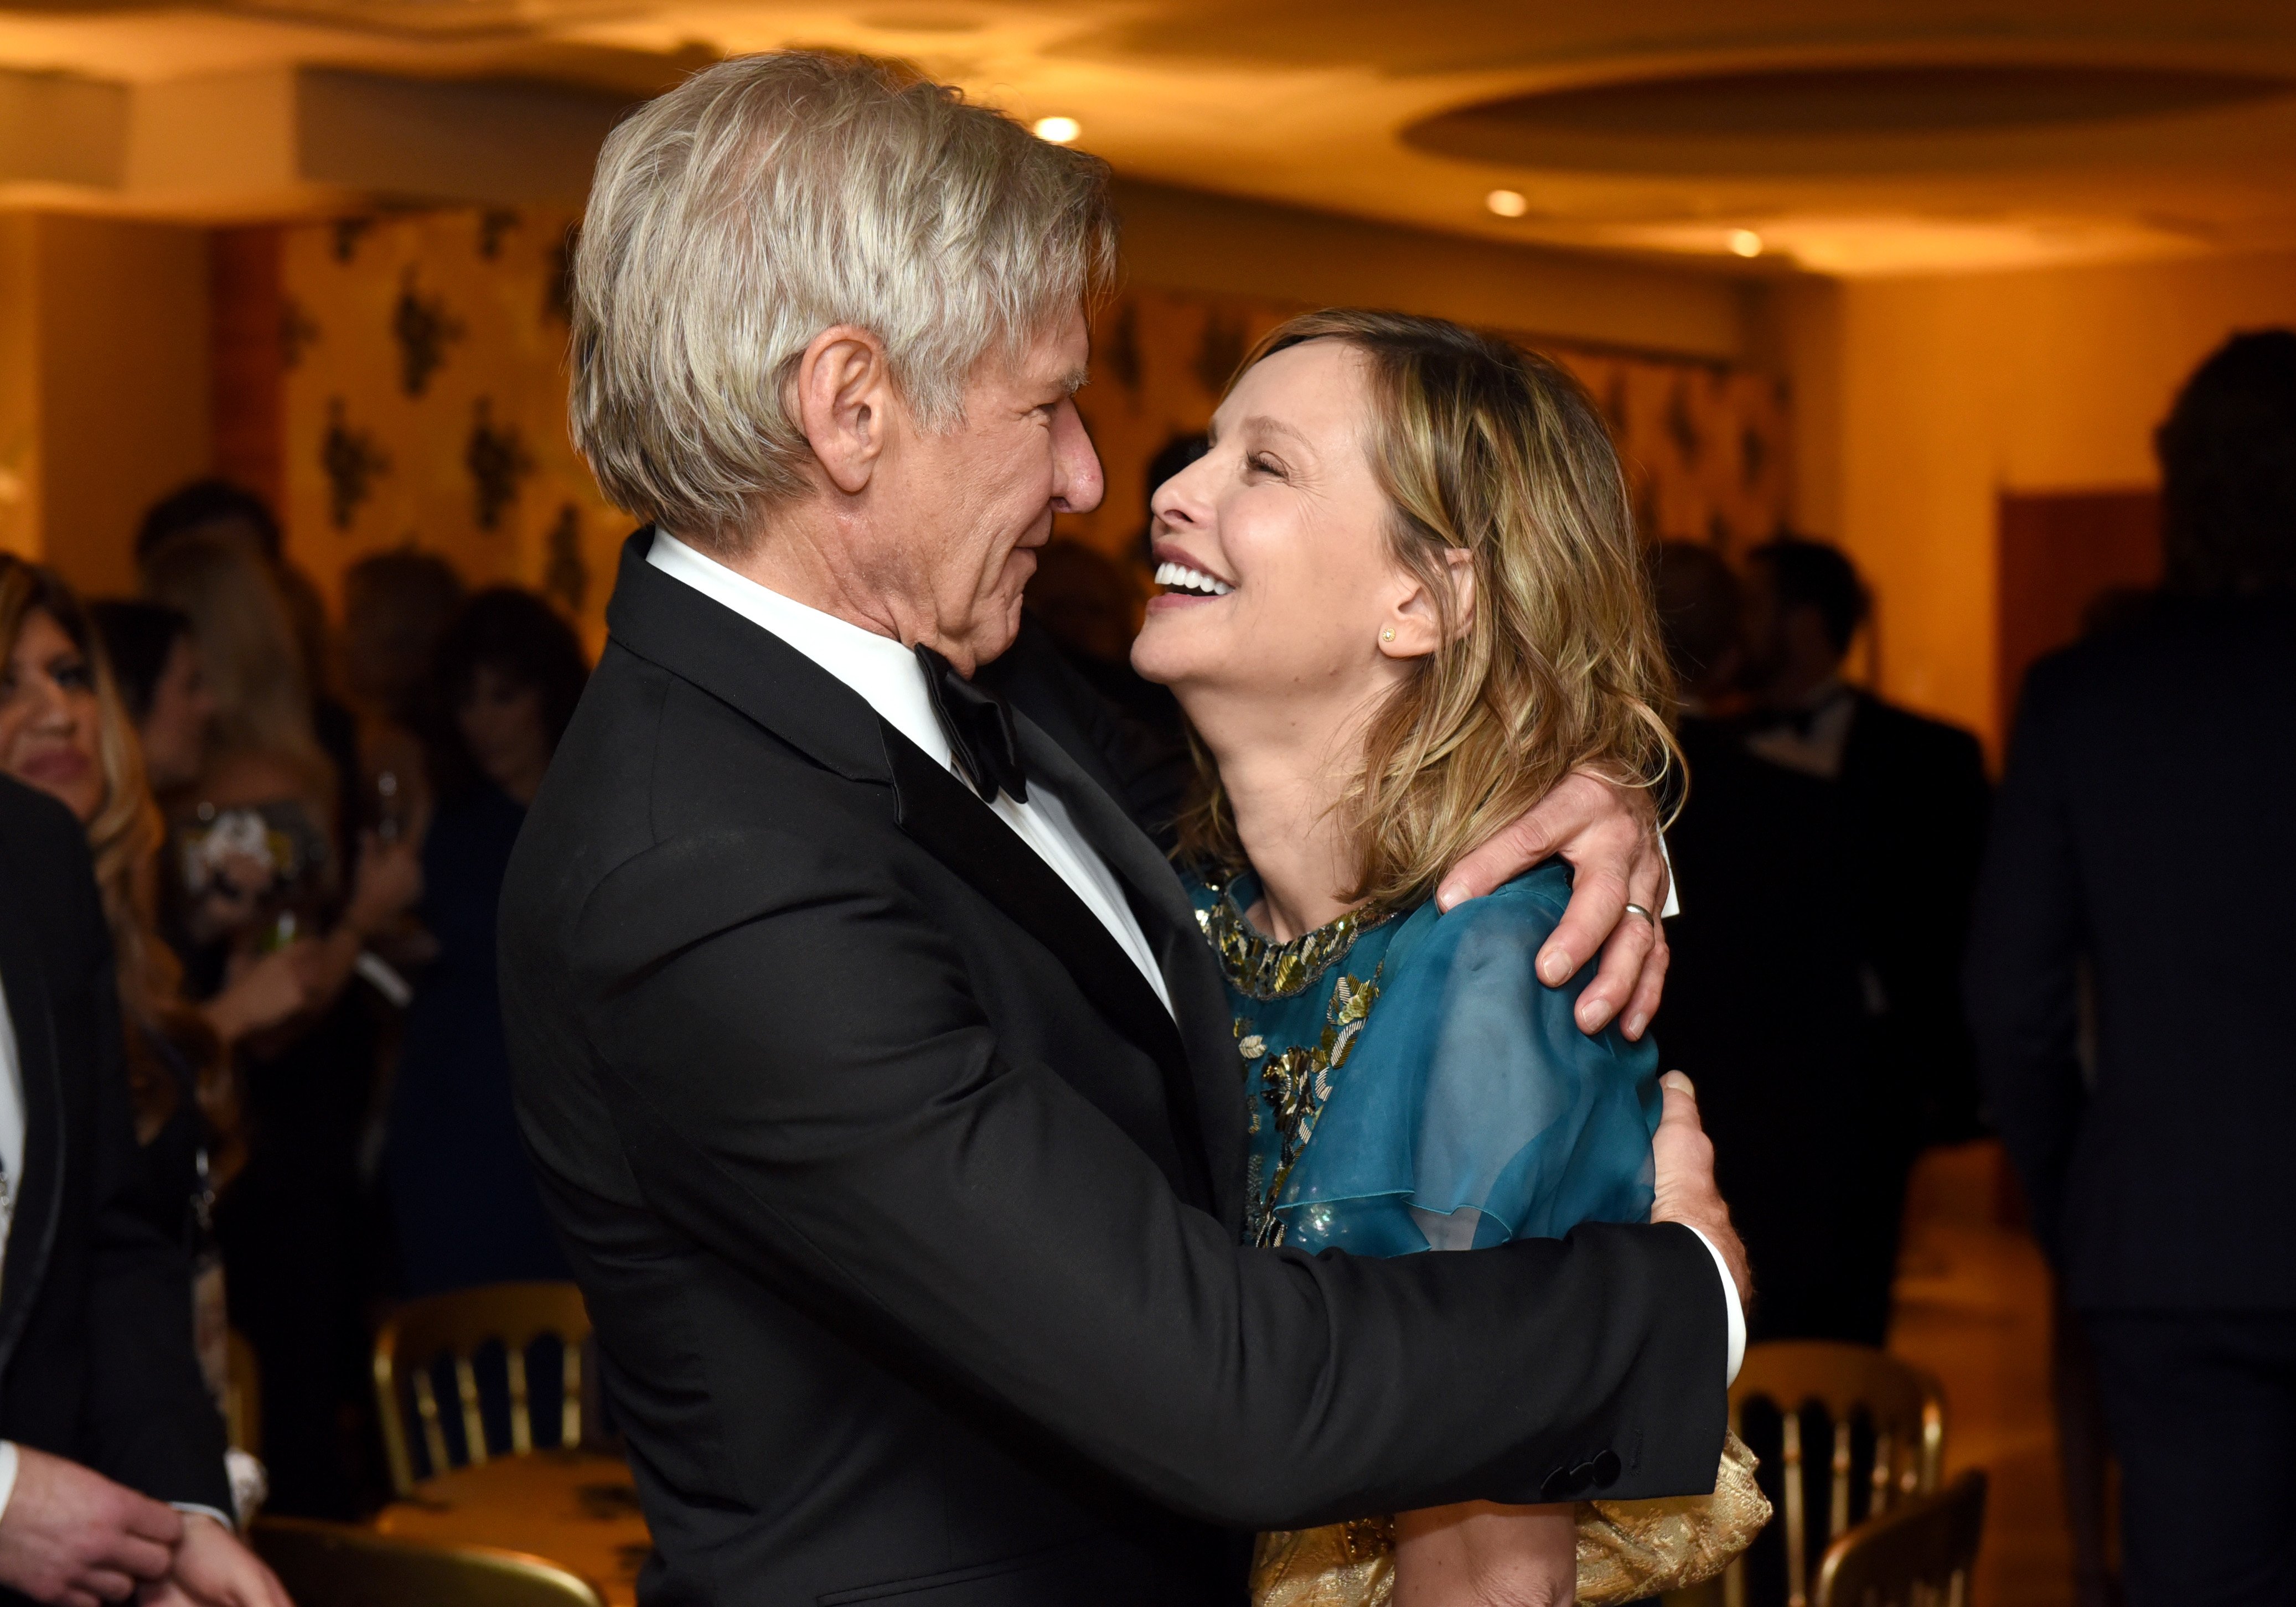 Actors Harrison Ford (L) and Calista Flockhart attend HBO's Official Golden Globe Awards After Party at The Beverly Hilton Hotel on January 10, 2016 in Beverly Hills, California.| Source: Getty Images